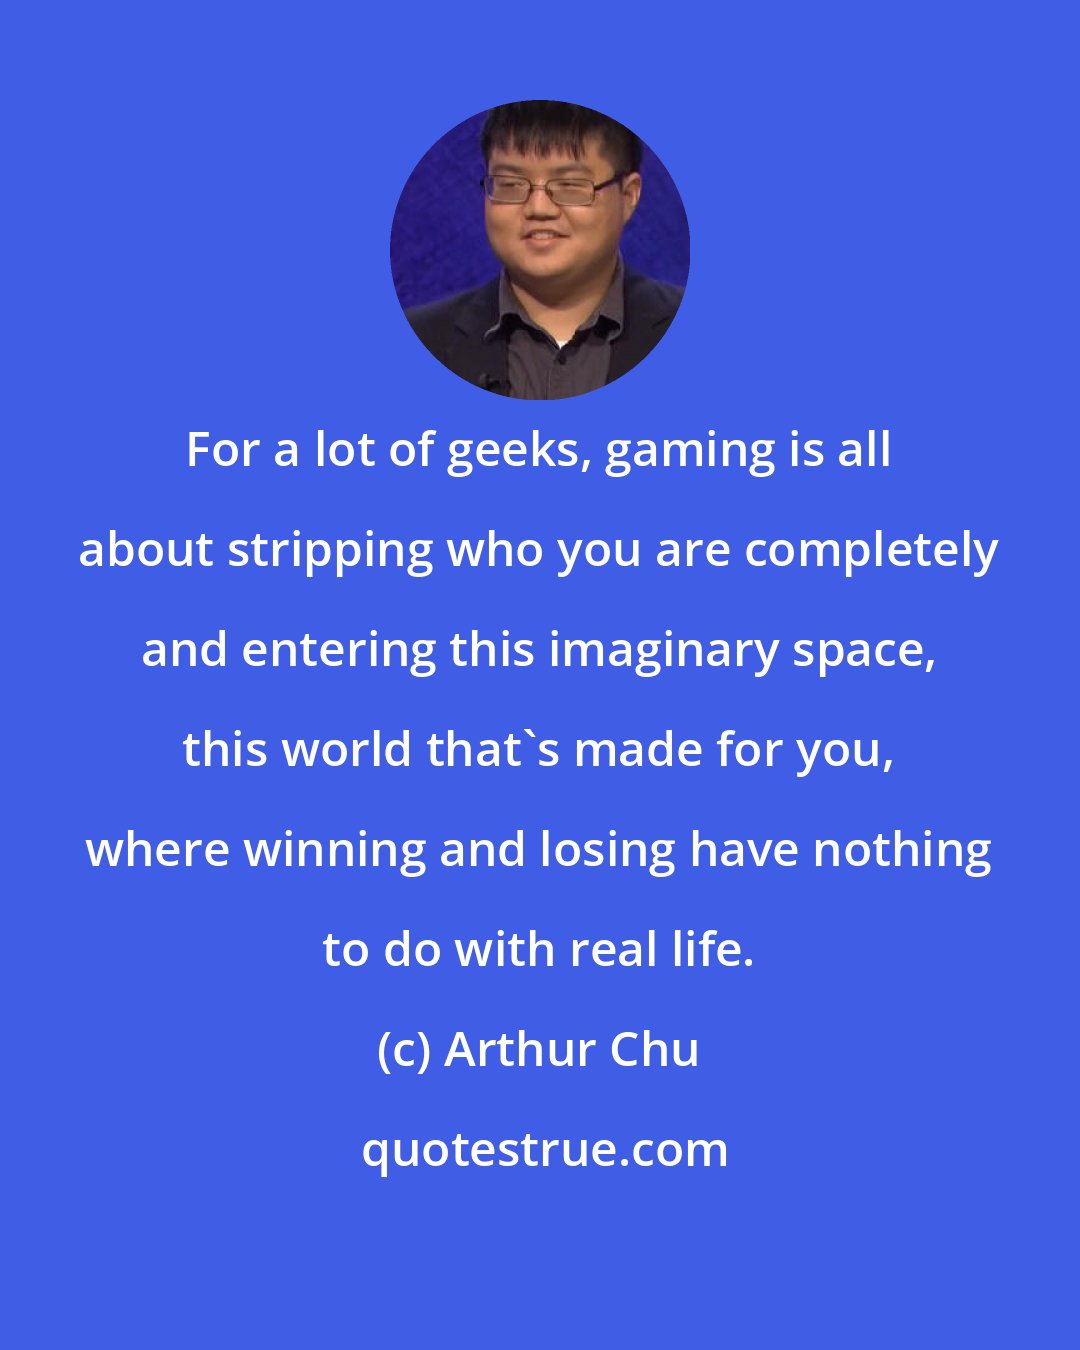 Arthur Chu: For a lot of geeks, gaming is all about stripping who you are completely and entering this imaginary space, this world that's made for you, where winning and losing have nothing to do with real life.